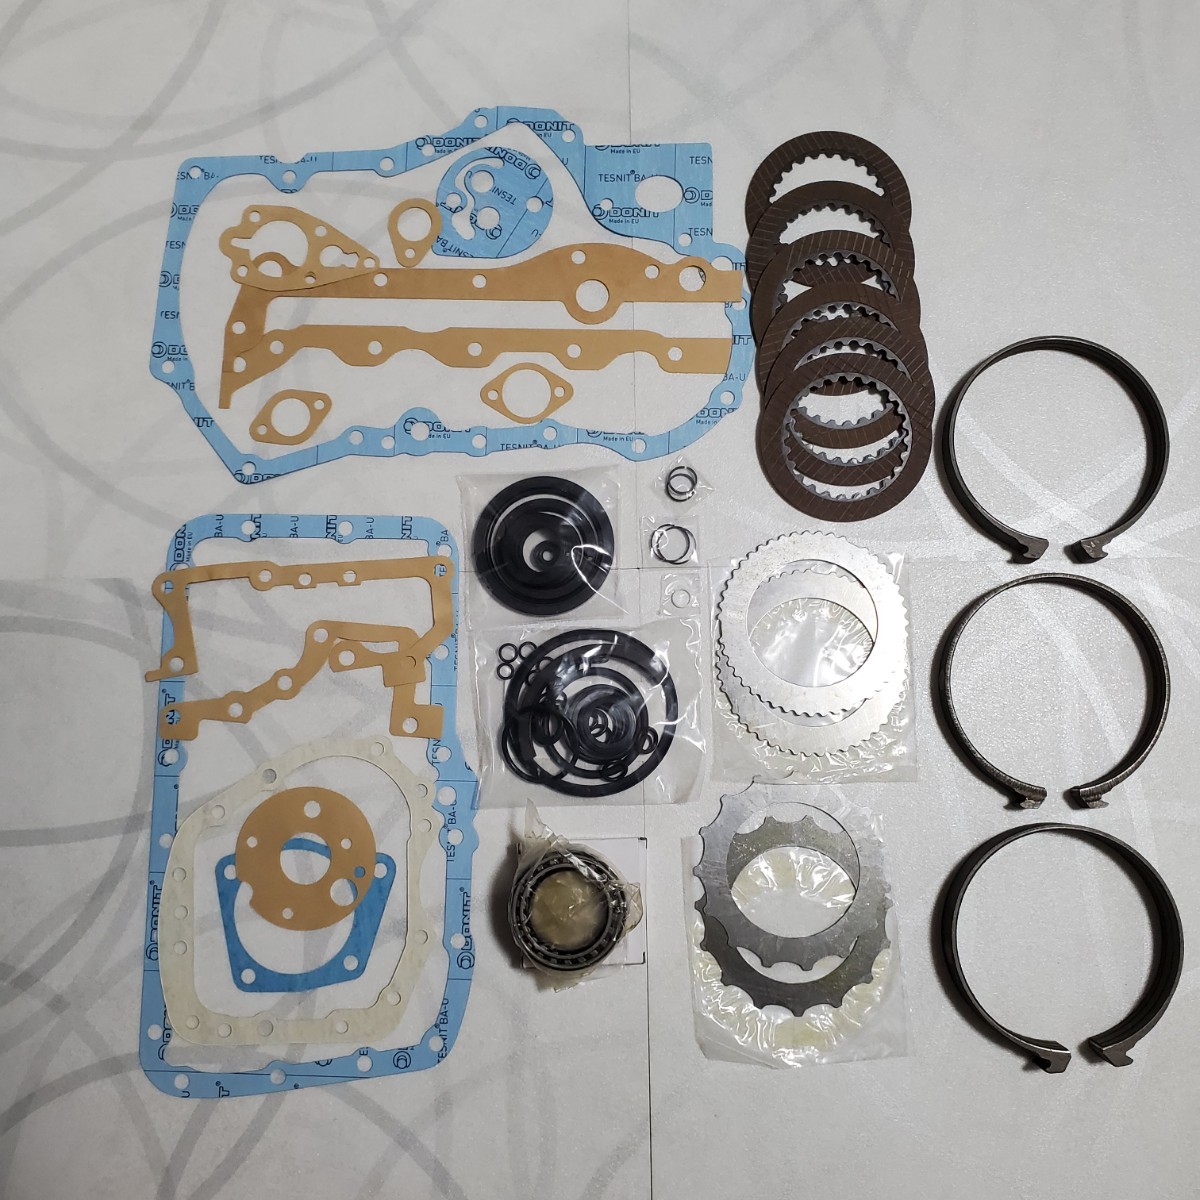  Rover Mini gearbox repair kit mission repair kit 79 year on and after A/T for band 3 sheets, gasket, seal attaching new goods 